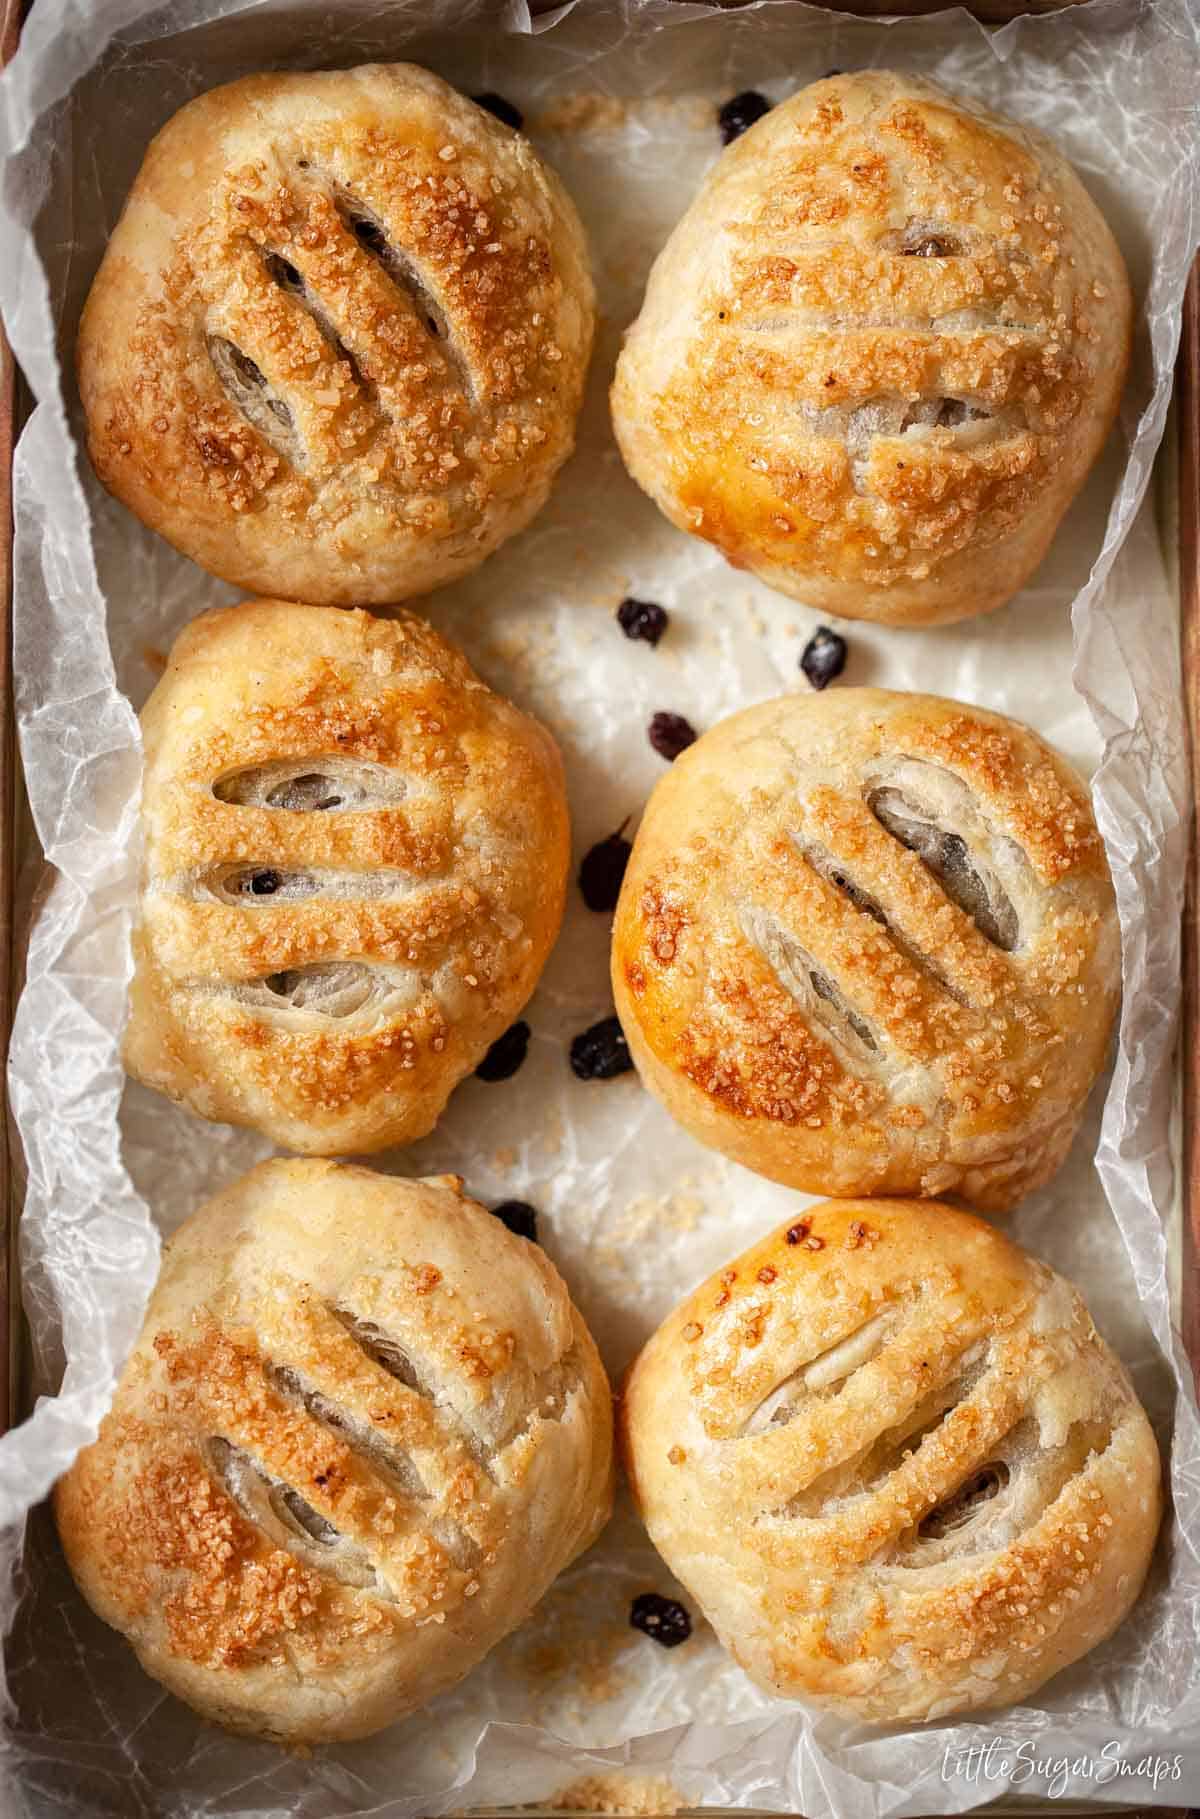 Six freshly baked Eccles cakes on waxed paper